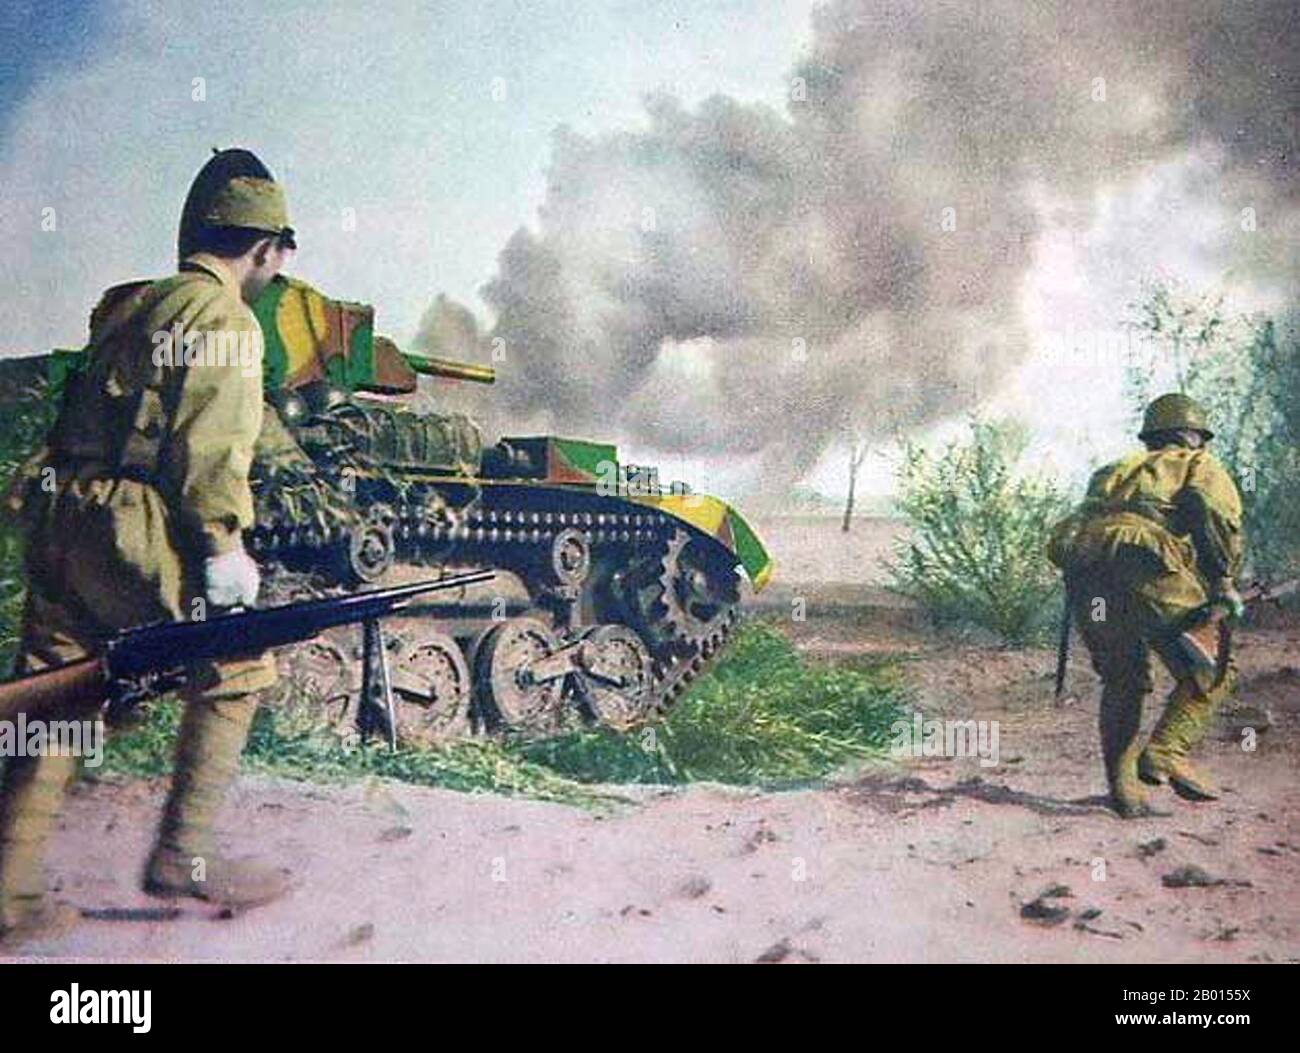 China: Japanese infantry and tank move into action, 1939. Second Sino-Japanese War (July 7, 1937 – September 9, 1945).  The Second Sino-Japanese War was a military conflict fought primarily between the Republic of China and the Empire of Japan. After the Japanese attack on Pearl Harbor, the war merged into the greater conflict of World War II as a major front of what is broadly known as the Pacific War. Although the two countries had fought intermittently since 1931, total war started in earnest in 1937 and ended only with the surrender of Japan in 1945. Stock Photo